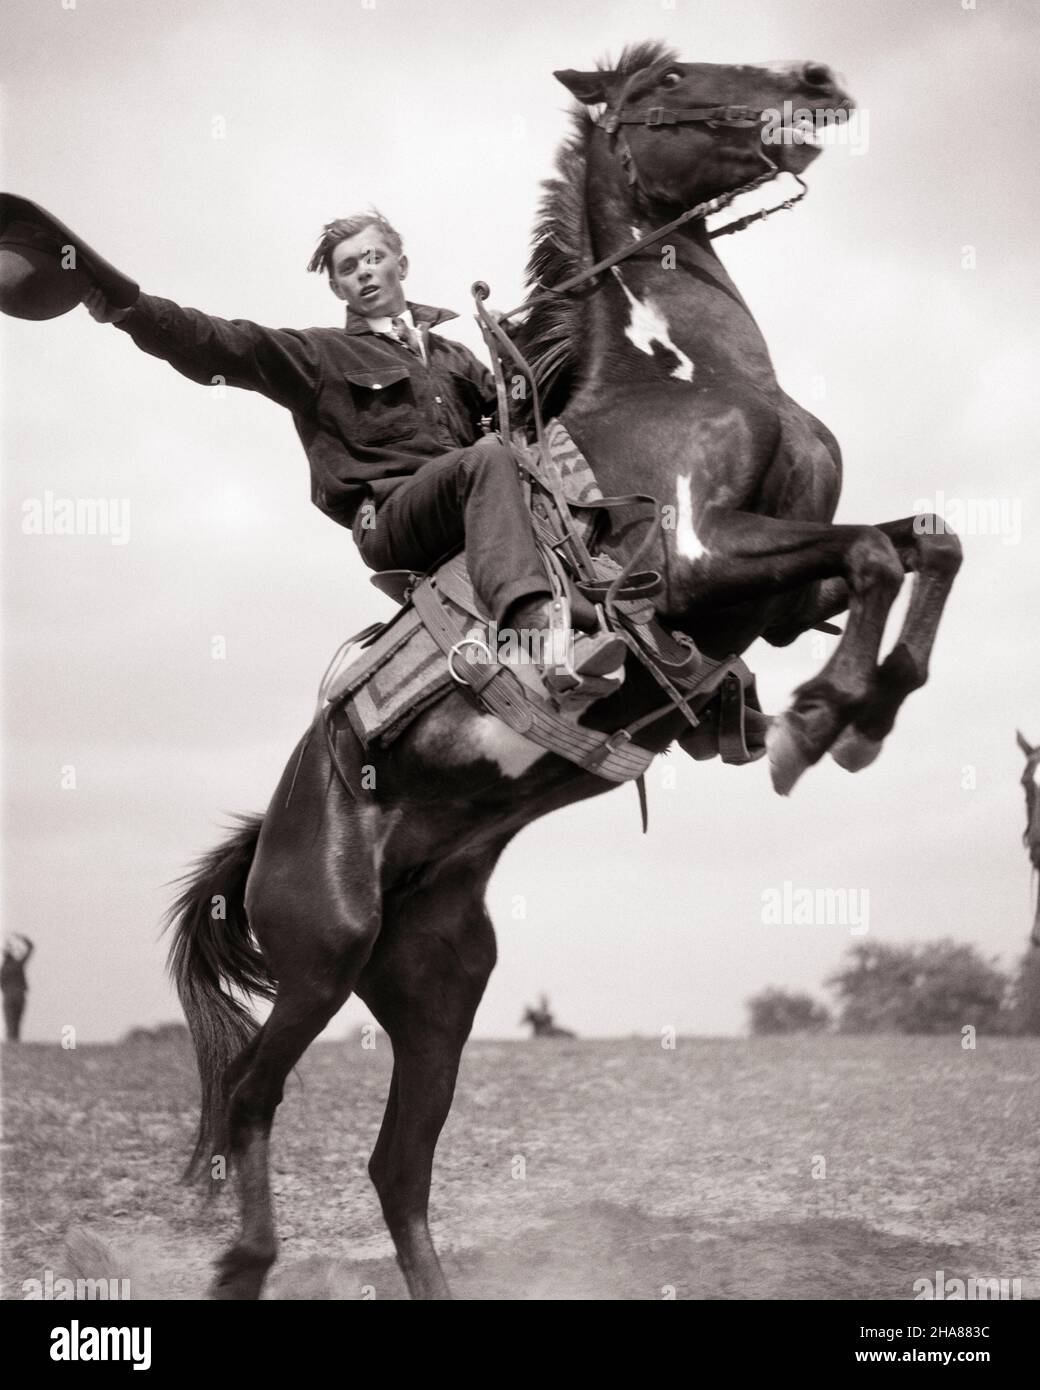 1920s YOUNG MAN RANCH HAND COWBOY ON WESTERN DUDE RANCH WAVING HAT DEMONSTRATING REARING A HORSE LOOKING AT CAMERA - h1144 HAR001 HARS BALANCE SAFETY TEAMWORK ATHLETE JOY LIFESTYLE ACTOR CELEBRATION JOBS RURAL ATHLETICS FULL-LENGTH PERSONS INSPIRATION SADDLE MALES RISK WESTERN ATHLETIC PERFORMANCE PROFESSION ENTERTAINMENT CONFIDENCE TRANSPORTATION B&W EYE CONTACT SUCCESS PERFORMING ARTS SKILL ACTIVITY DREAMS OCCUPATION PHYSICAL SKILLS MAMMALS REARING ADVENTURE PERFORMER STRENGTH COURAGE EXCITEMENT RECREATION PRIDE A ON DEMONSTRATION EMPLOYMENT ENTERTAINER OCCUPATIONS CONCEPTUAL ACTORS ATHLETES Stock Photo